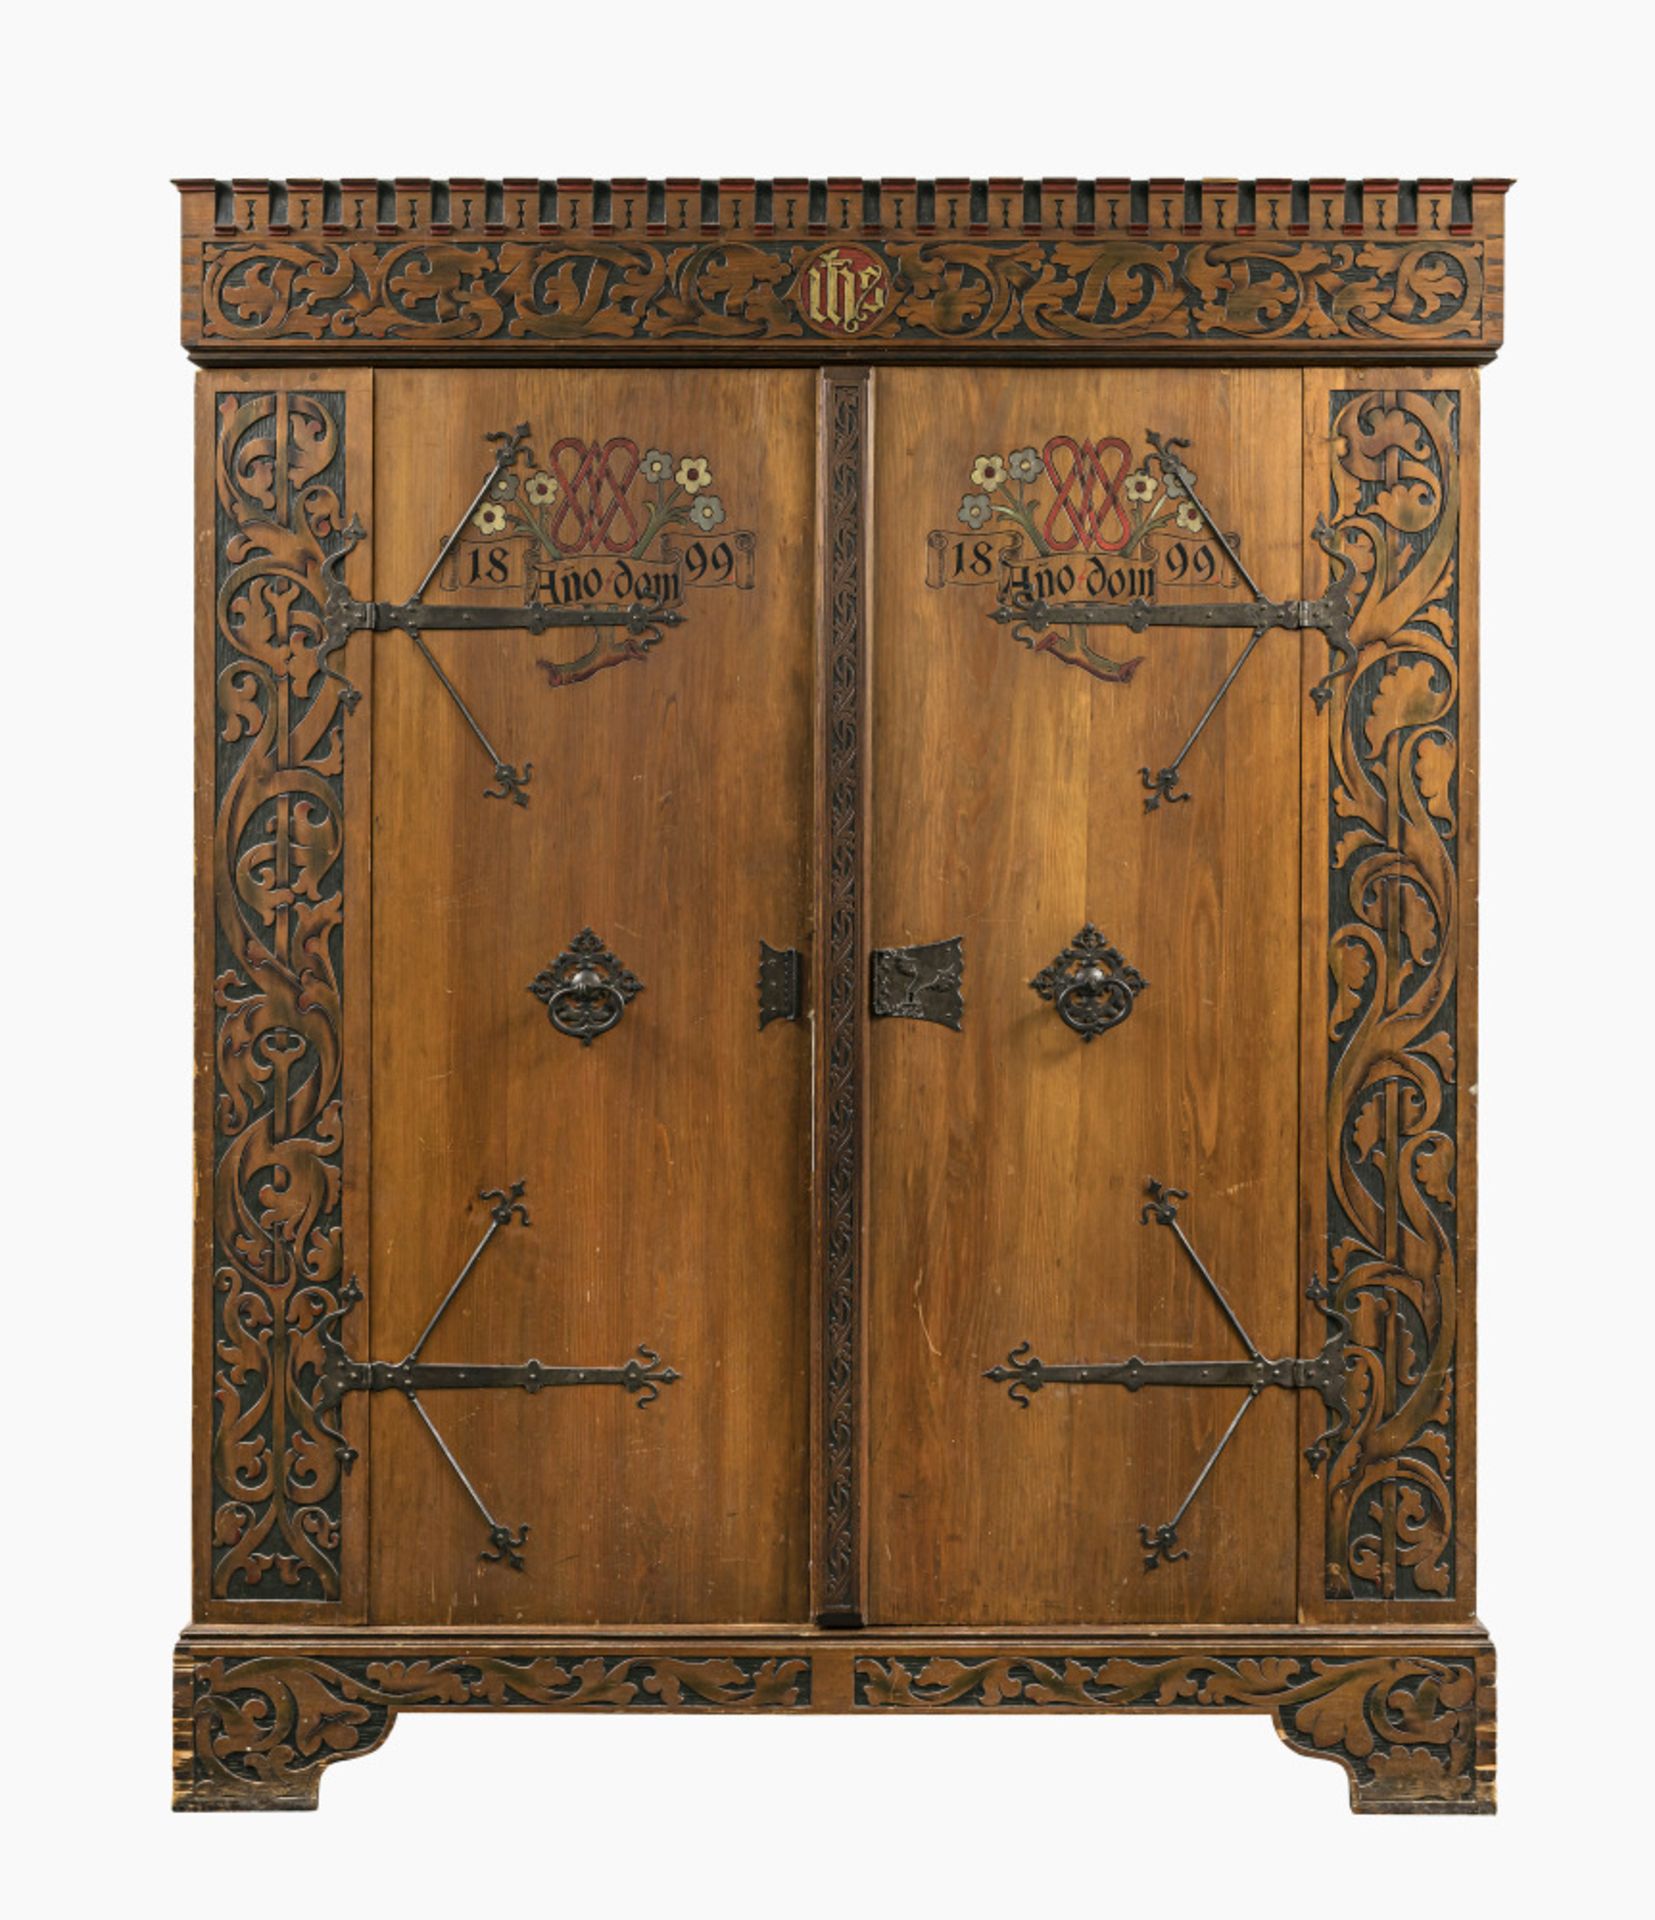 A cupboard, dated 1899, - in neo-Gothic style